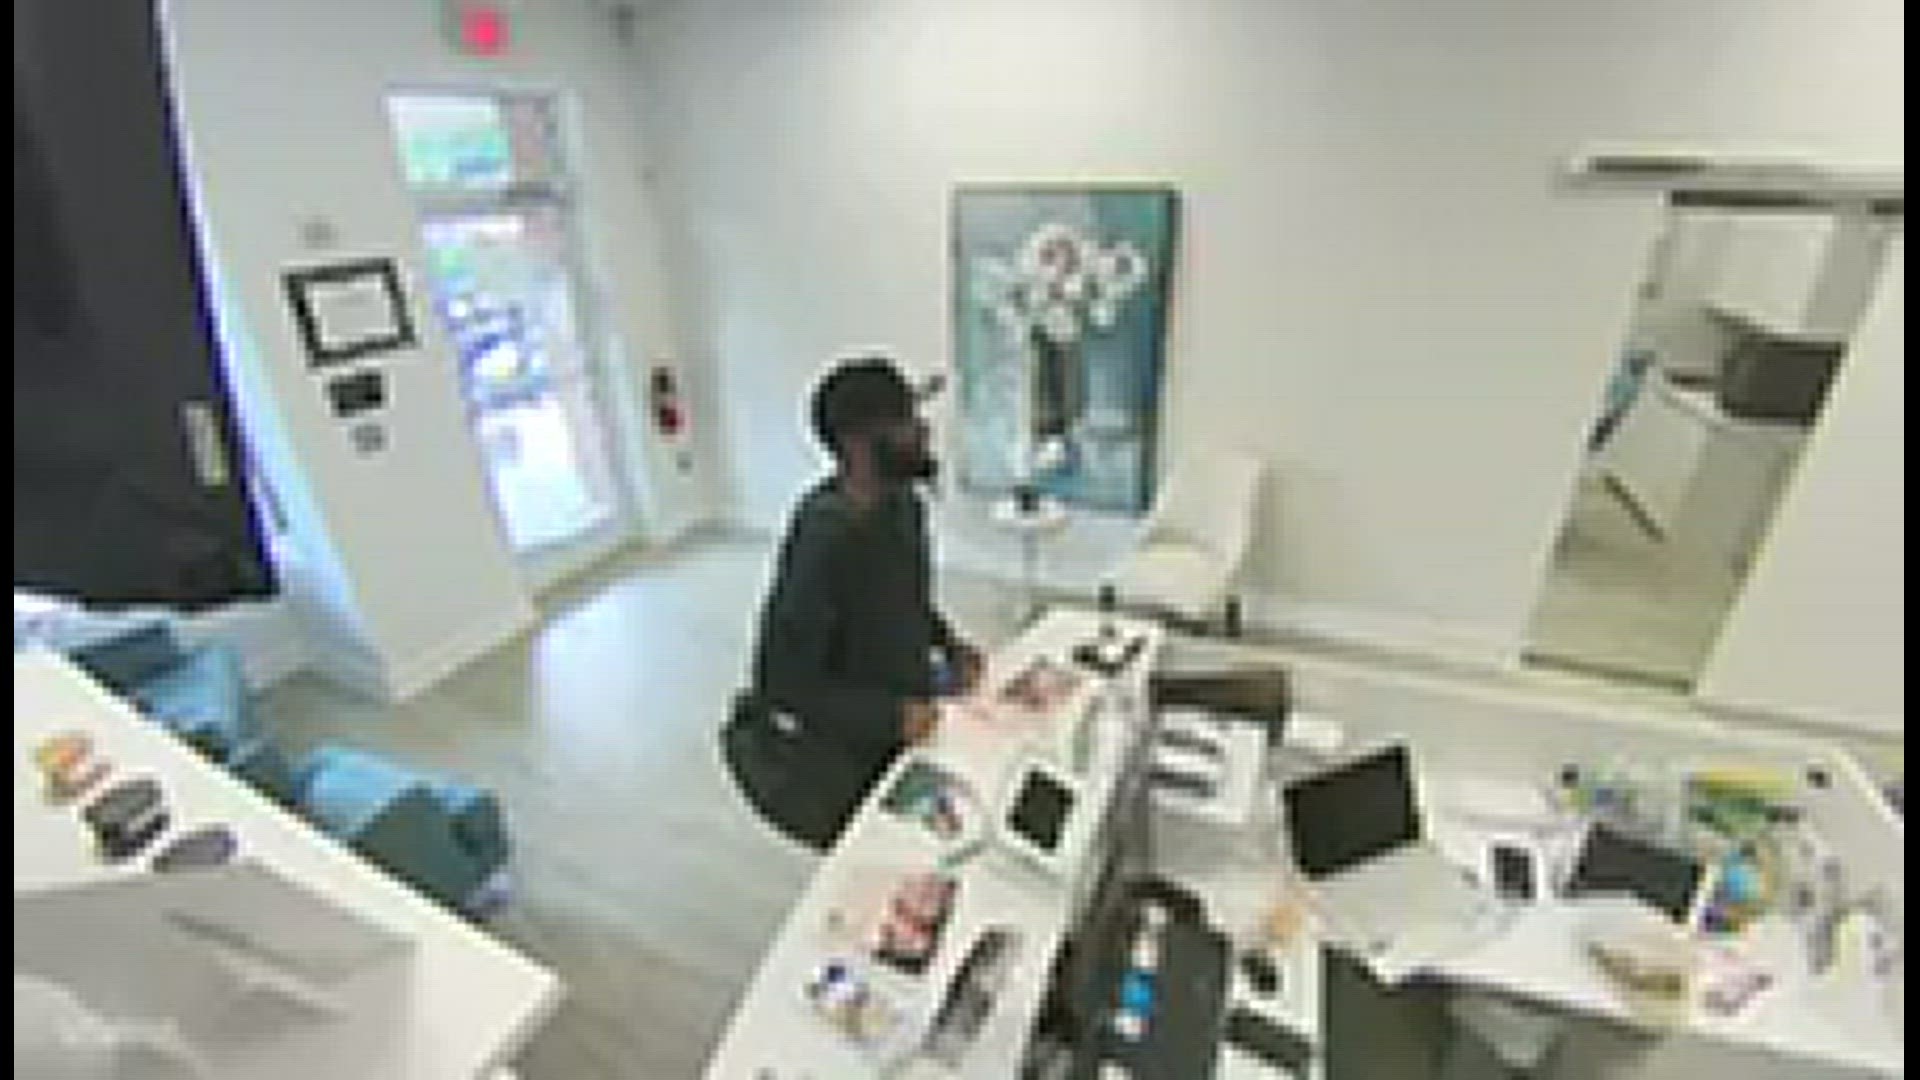 Video footage shows the suspect taking pictures and stealing a dentist's license off the wall.